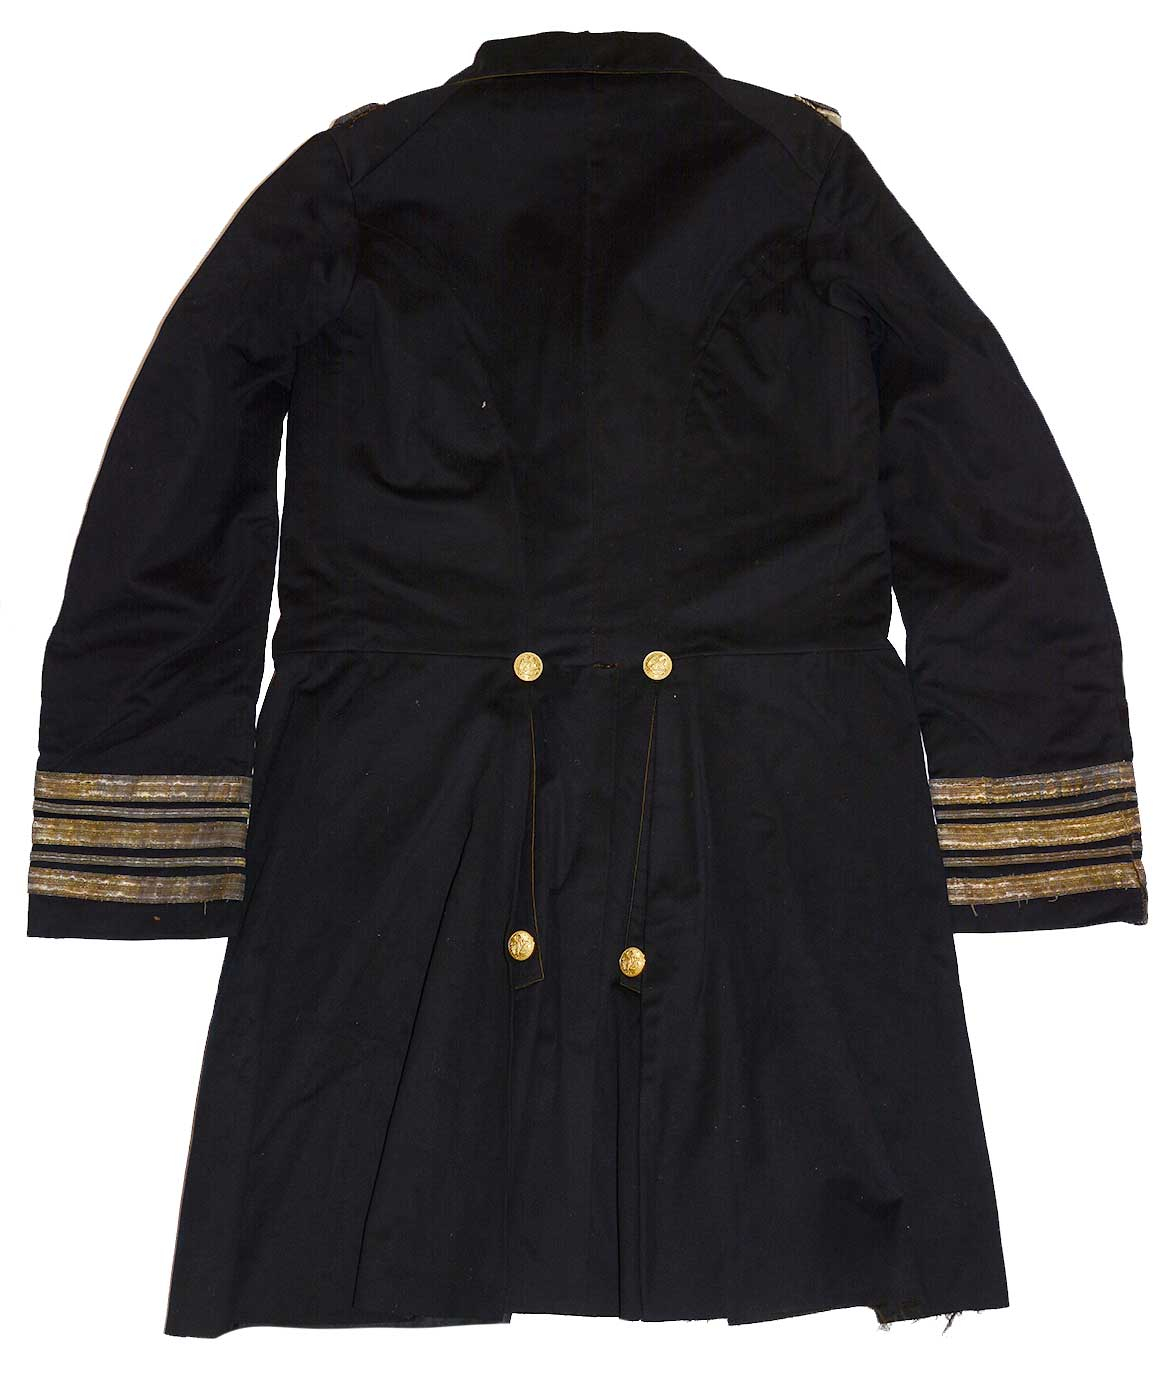 CIVIL WAR COMMODORE’S UNDRESS FROCK COAT OF SILAS H. STRINGHAM, USN ...